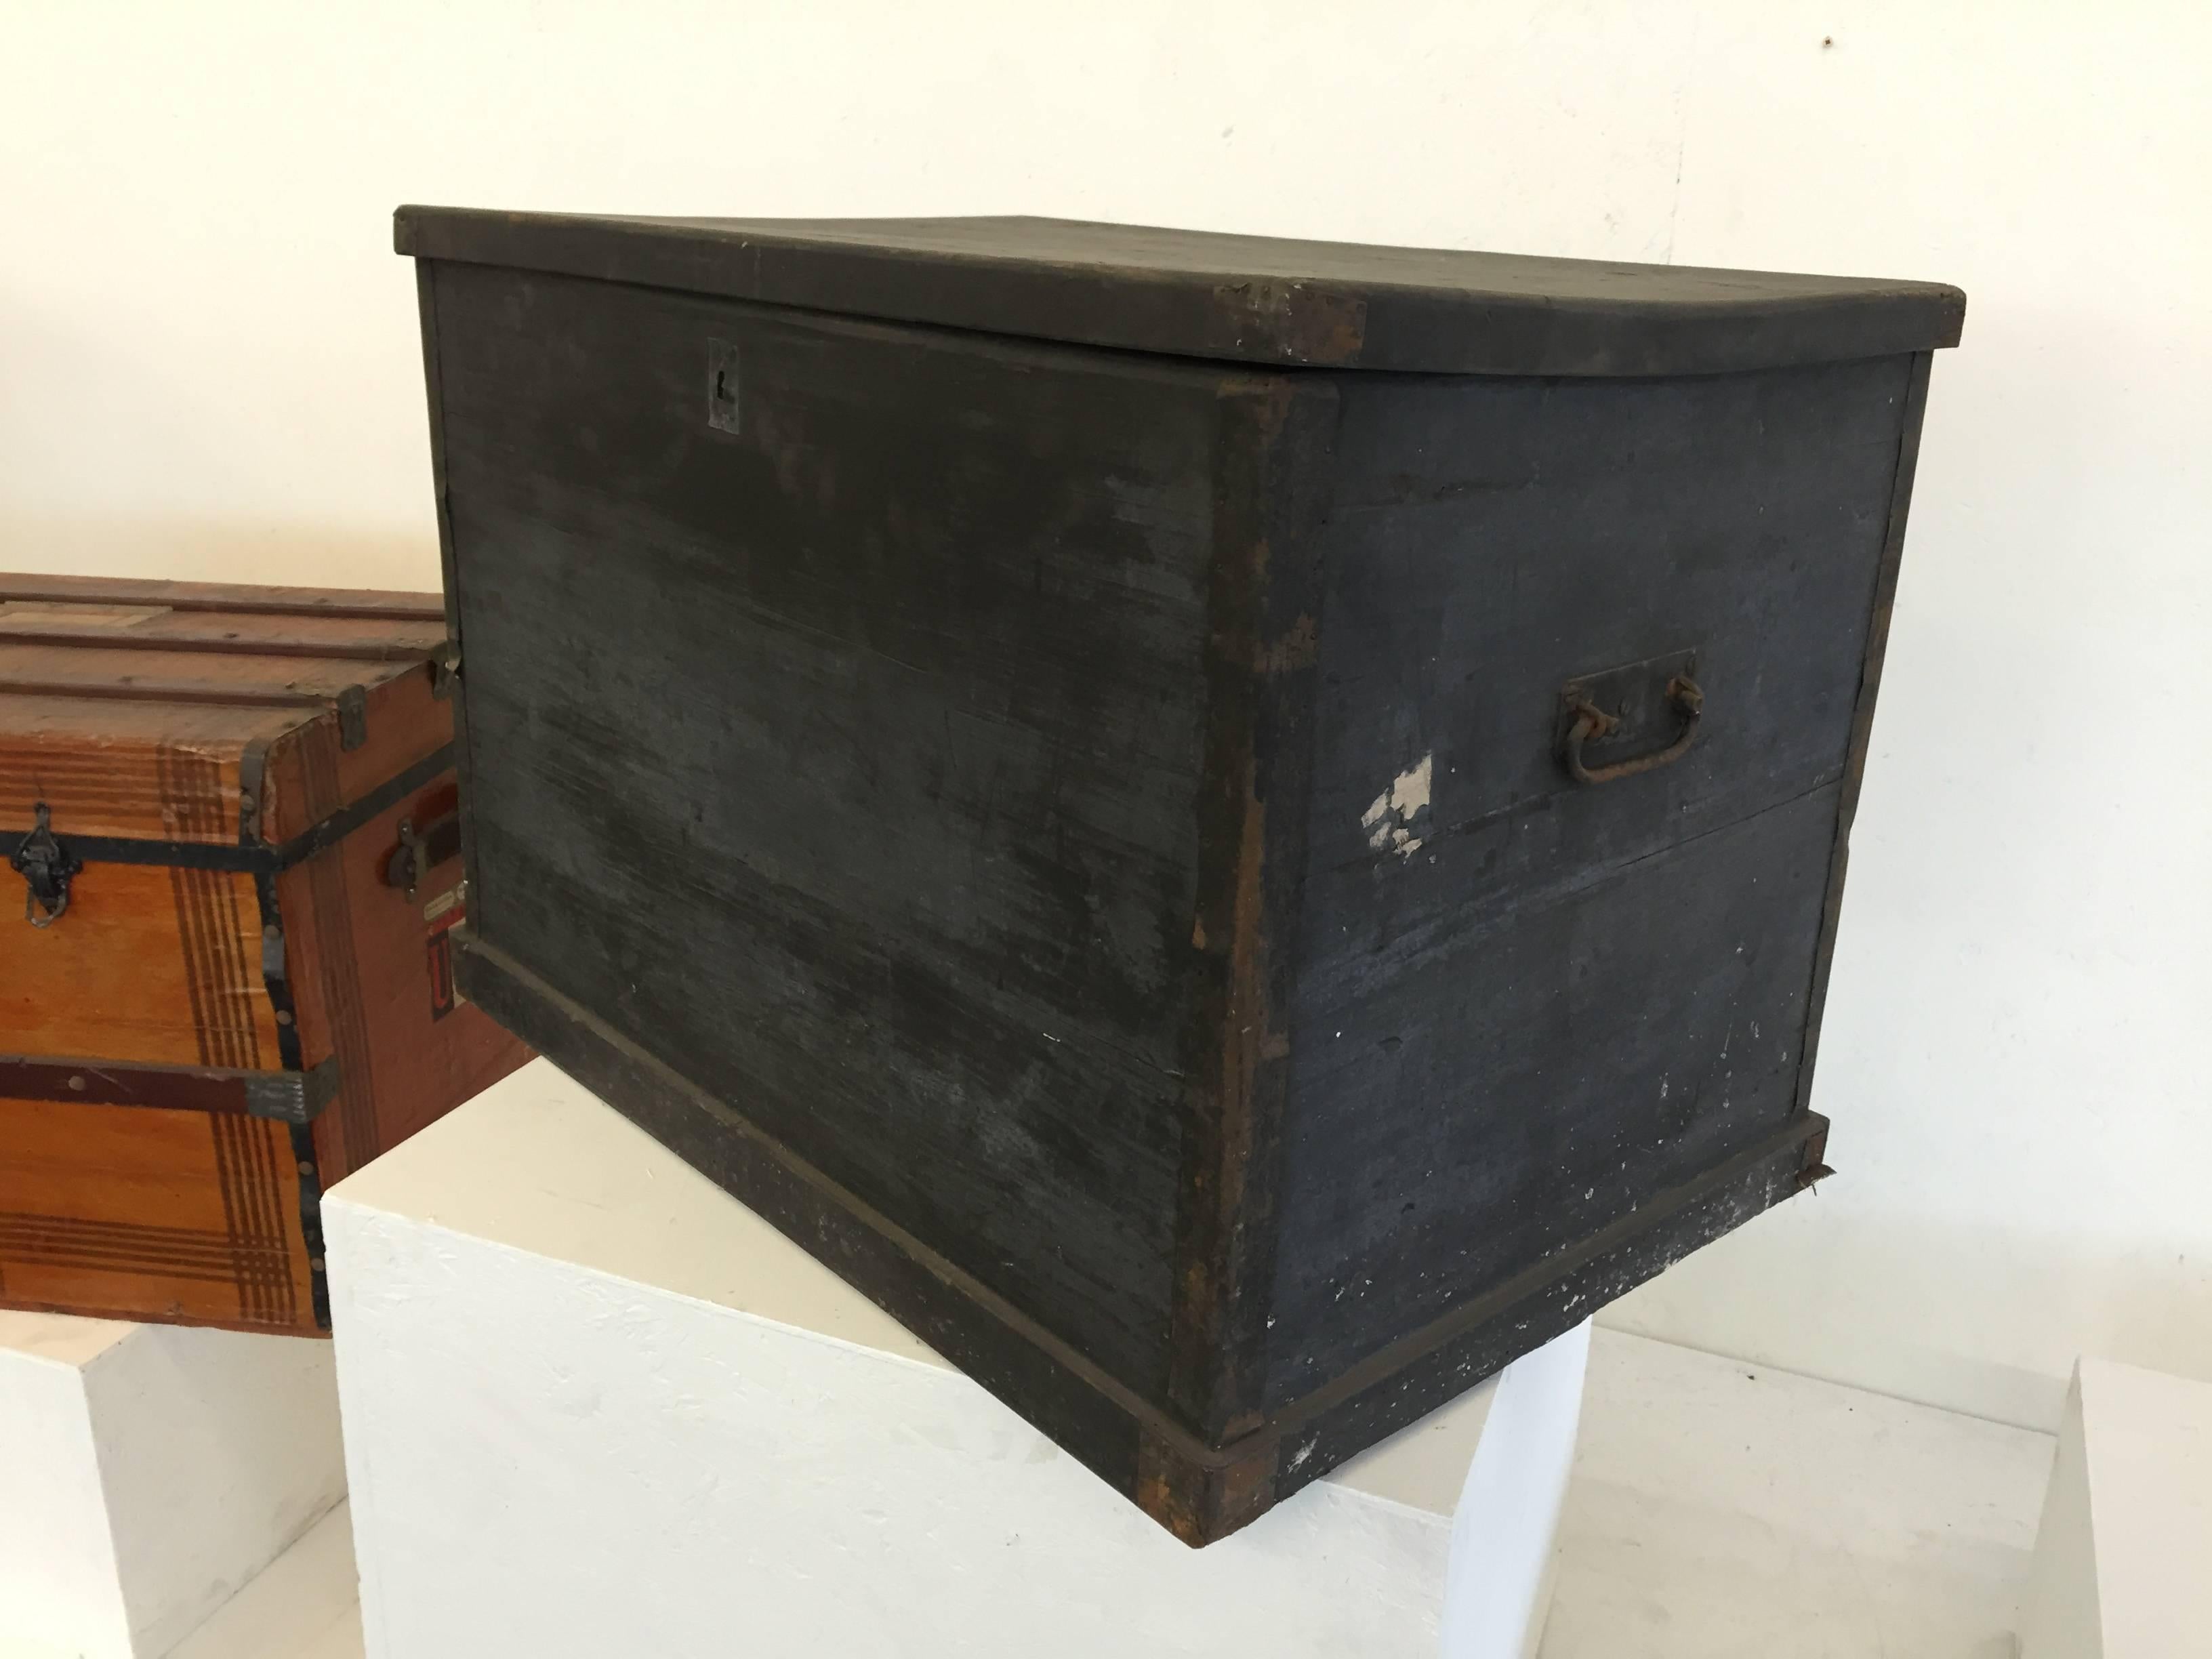 A great collection of three highly decorative Classic travel trunks image 2: Wooden trunk with a Classic blue interior wallpaper image 3: Wood with Canvas finished trunk image 4: Brazilian made 